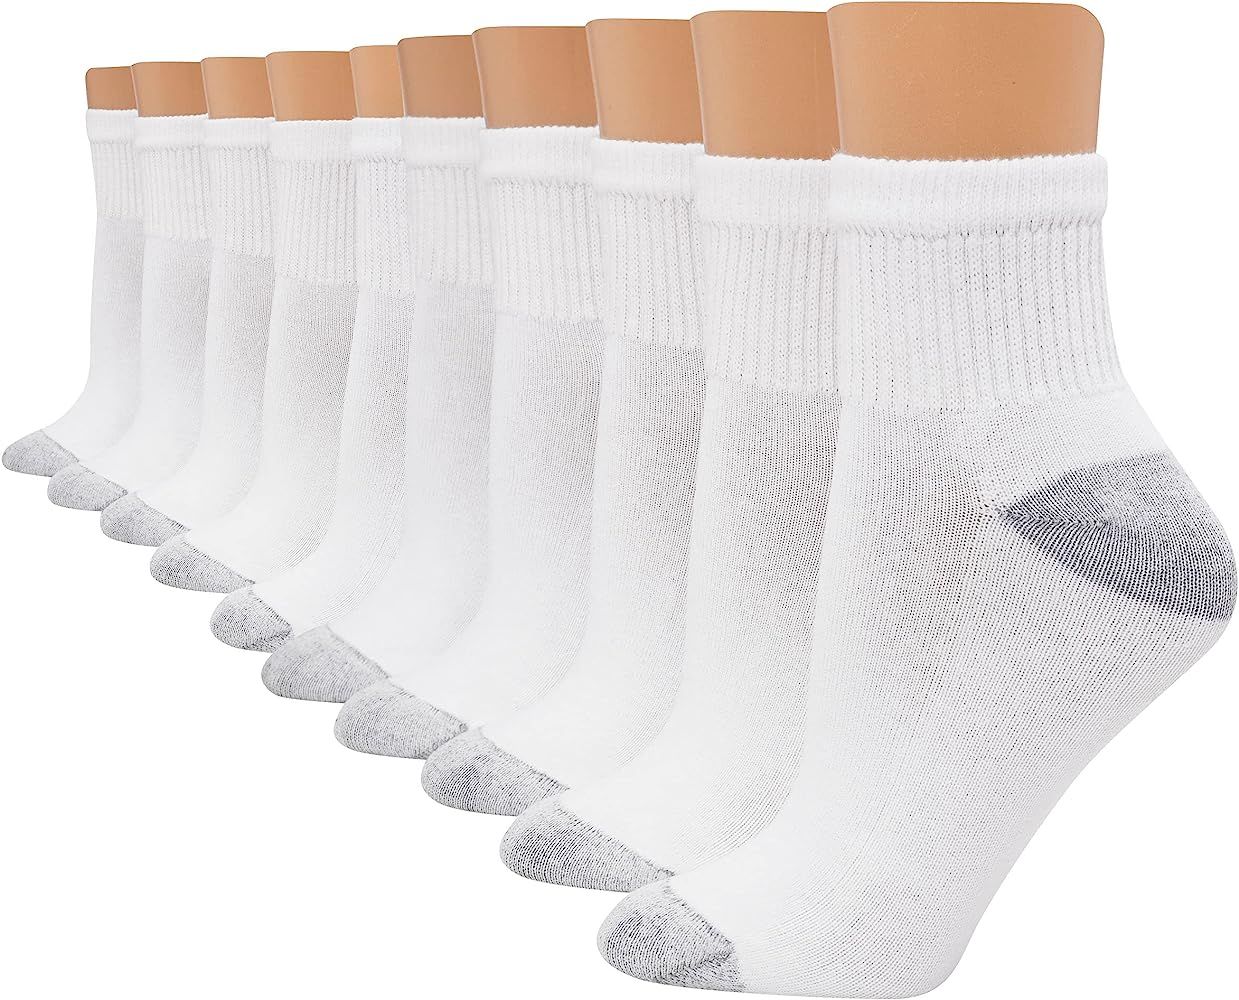 Hanes womens Value, Ankle Soft Moisture-wicking Socks, Available in 10 and 14-packs | Amazon (US)